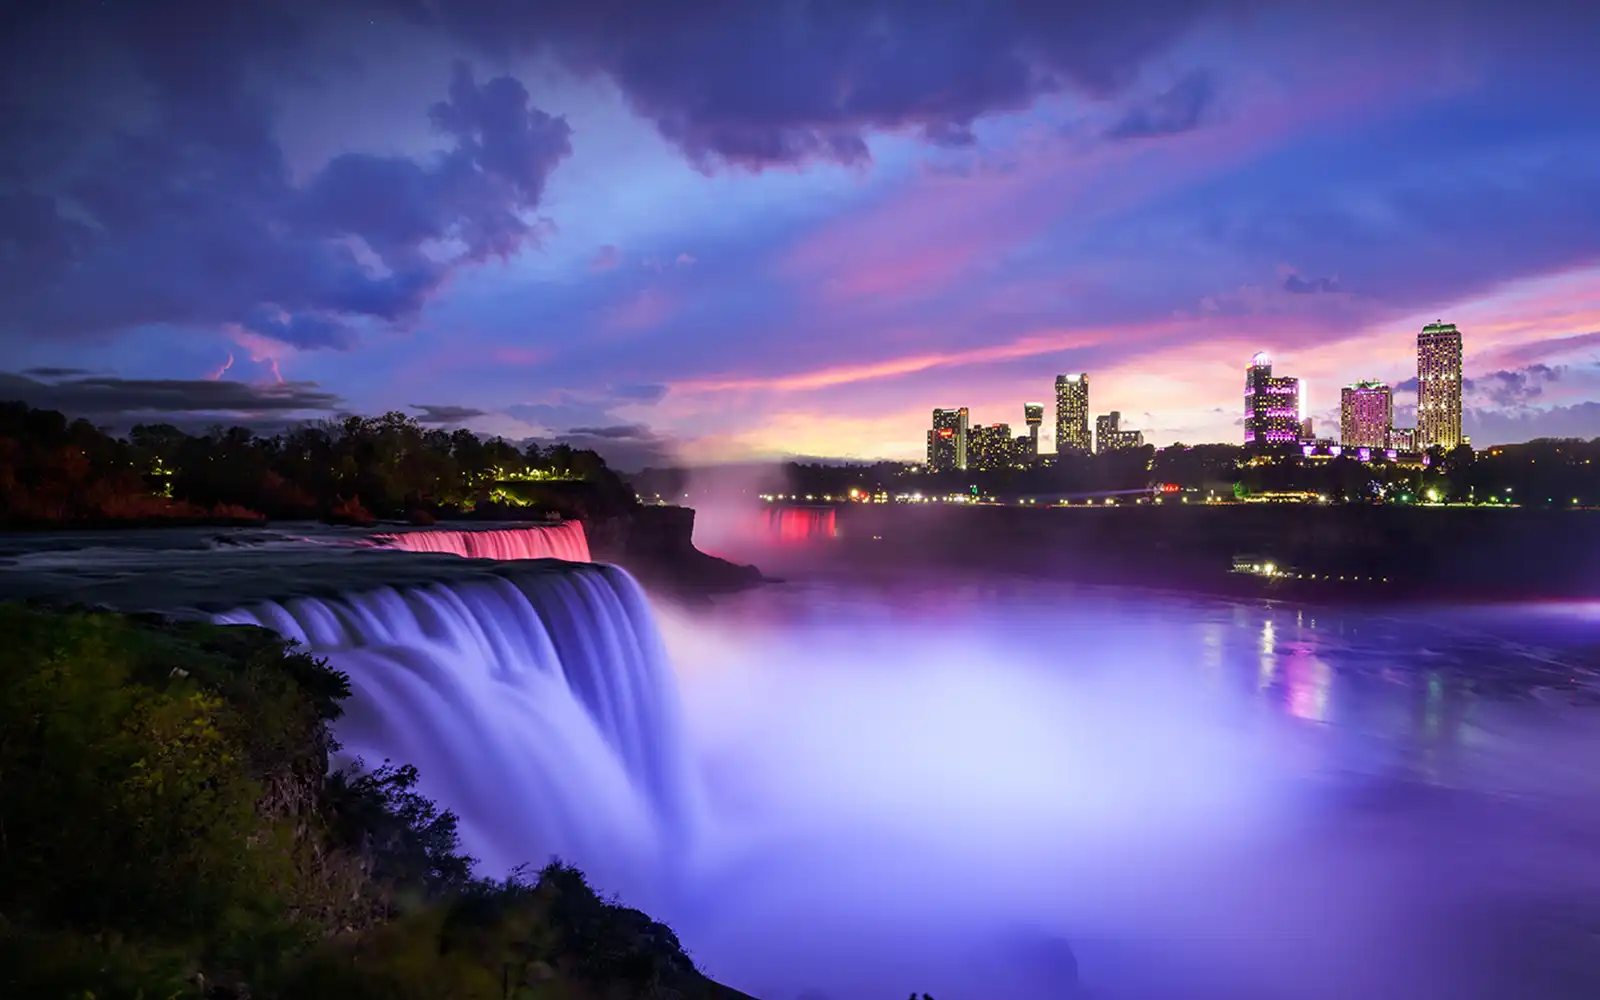 Nighttime view of Niagara Falls, brightly lit with water flowing under dark sky.